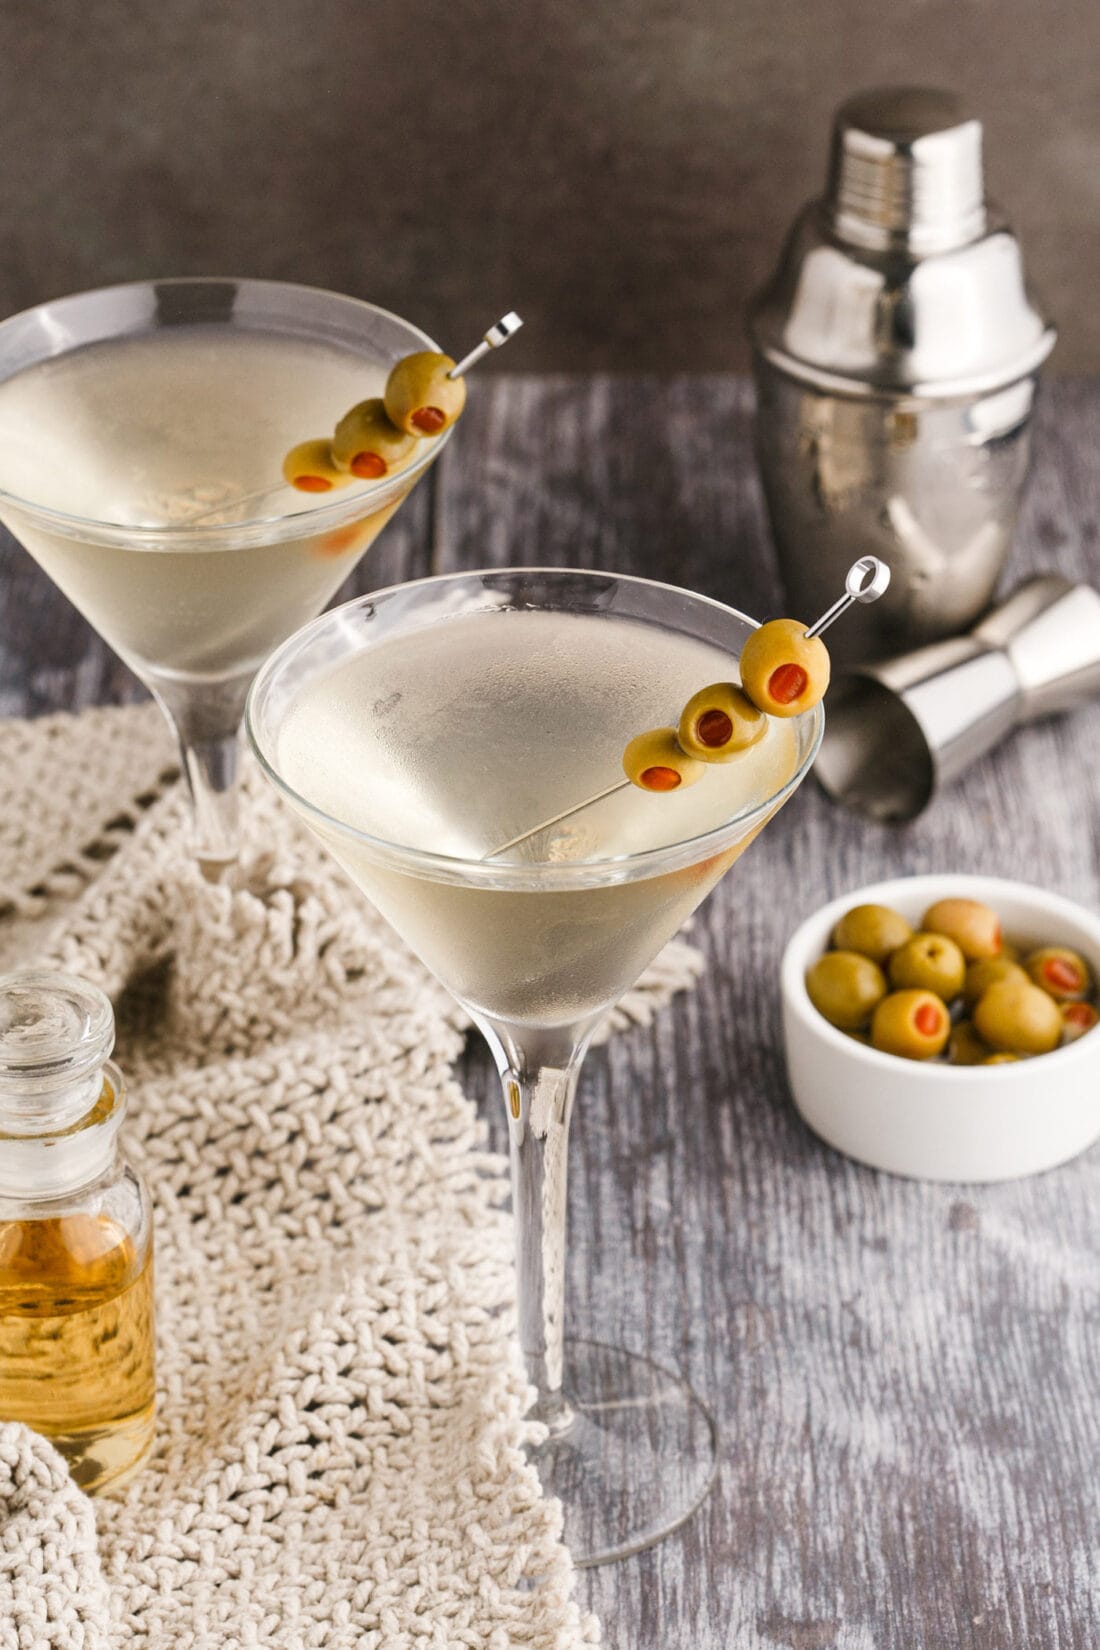 Dirty Martini with olives and a shaker